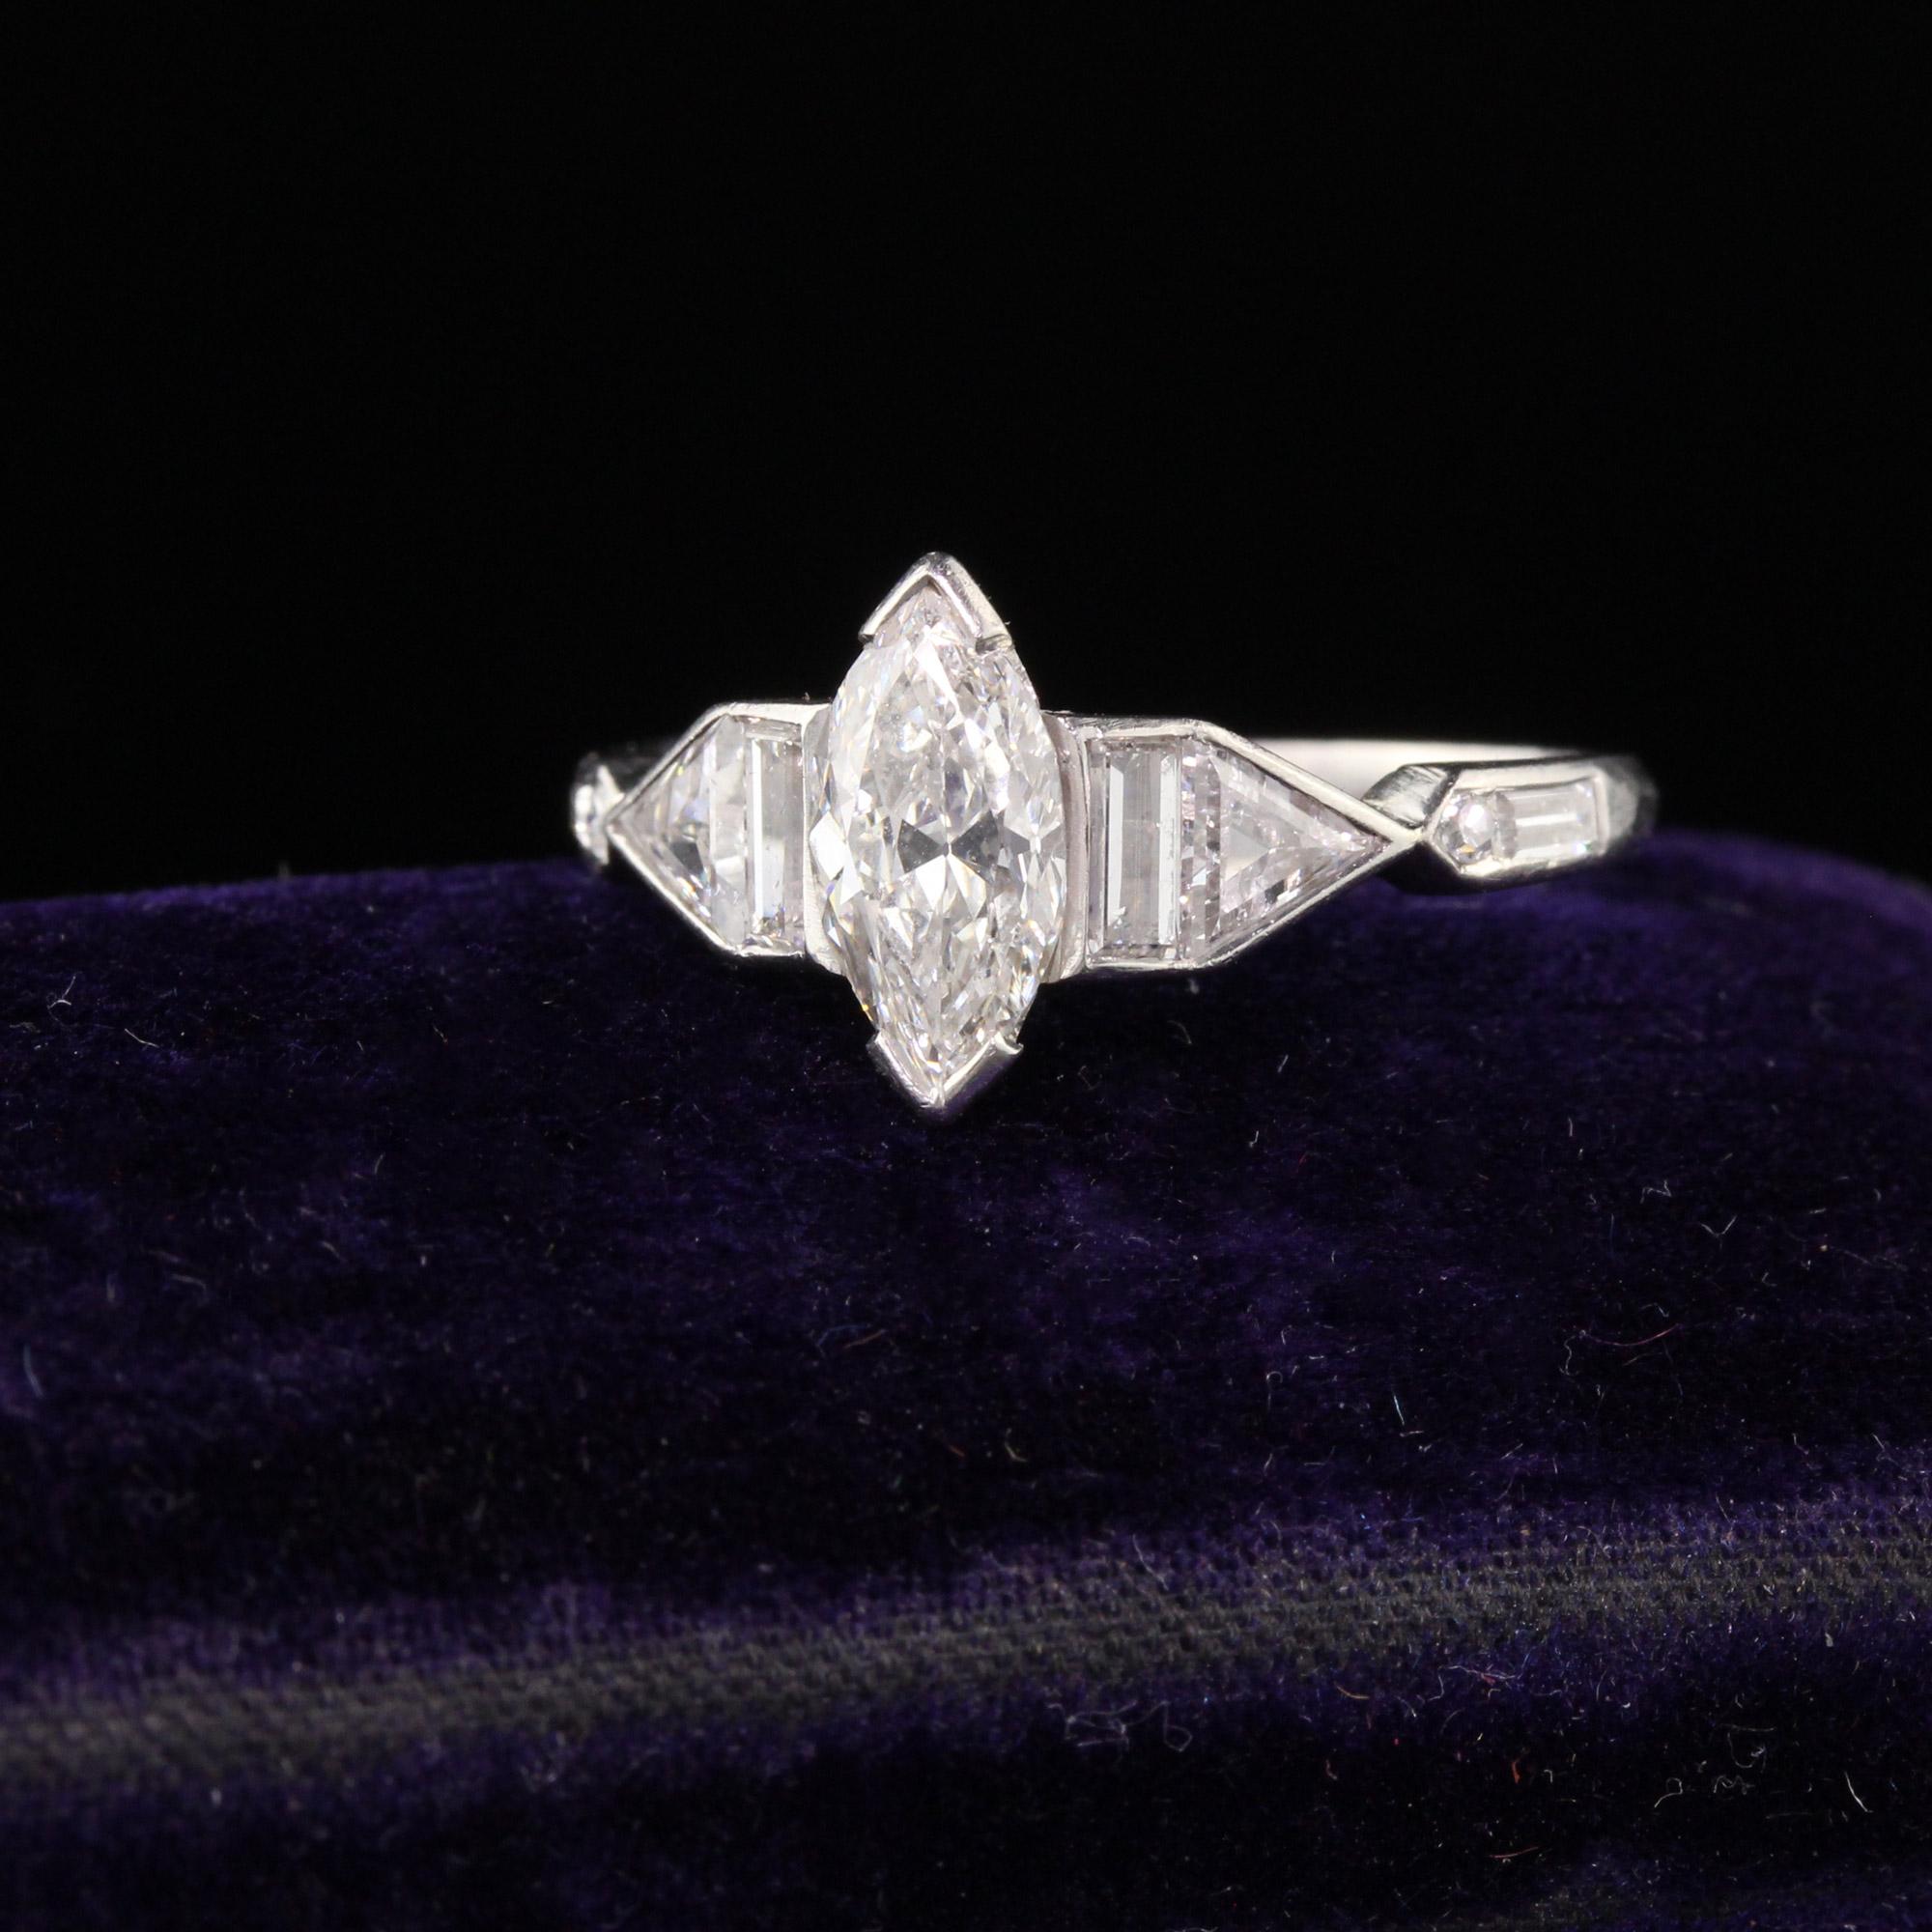 Magnificent Art Deco engagement ring in platinum featuring an old cut marquise in the center surrounded by a vertically set baguette, trillion cut, single cut, and horizontally set baguette on either side. Very unique and absolutely breathtaking. In